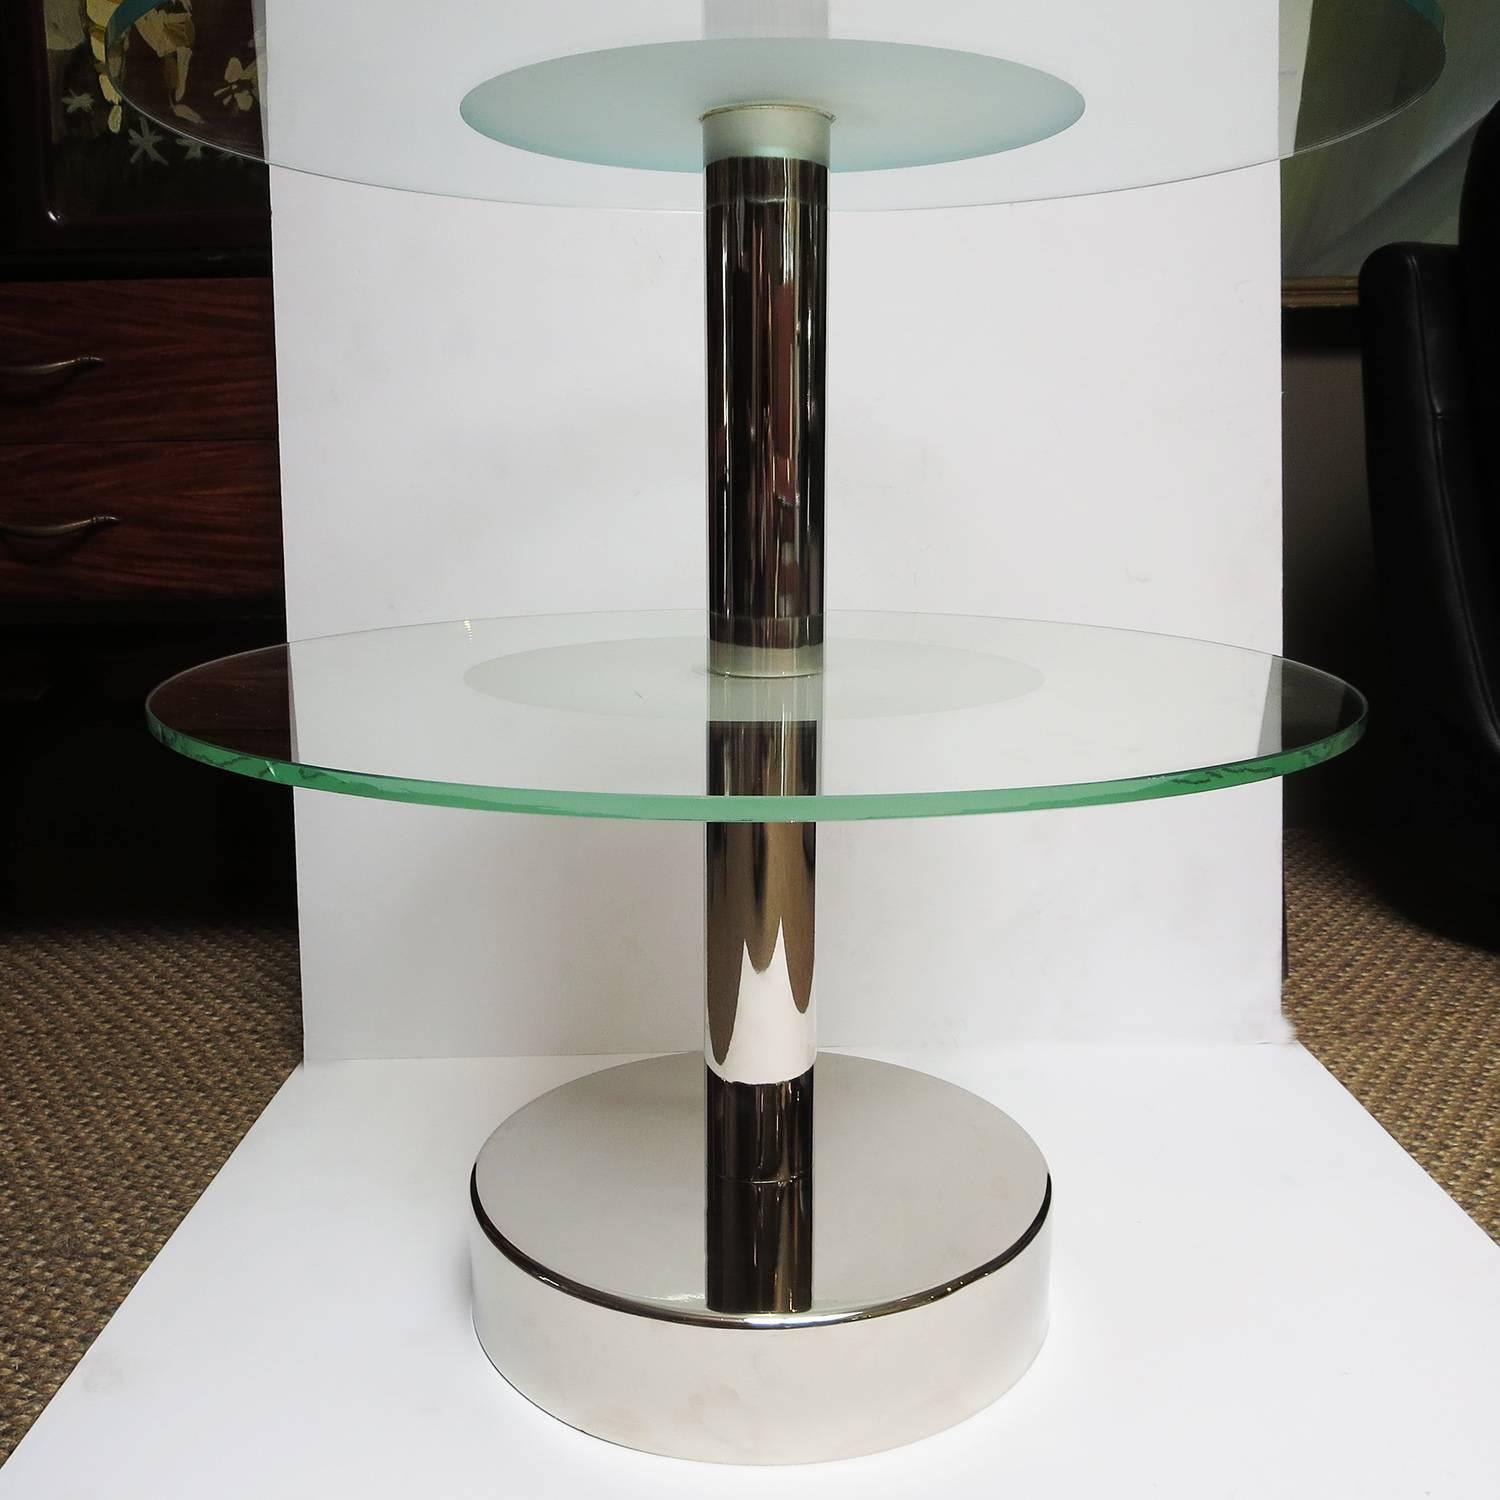 Plated Art Deco Glass and Steel Side Tables in the Manner of Gio Ponti